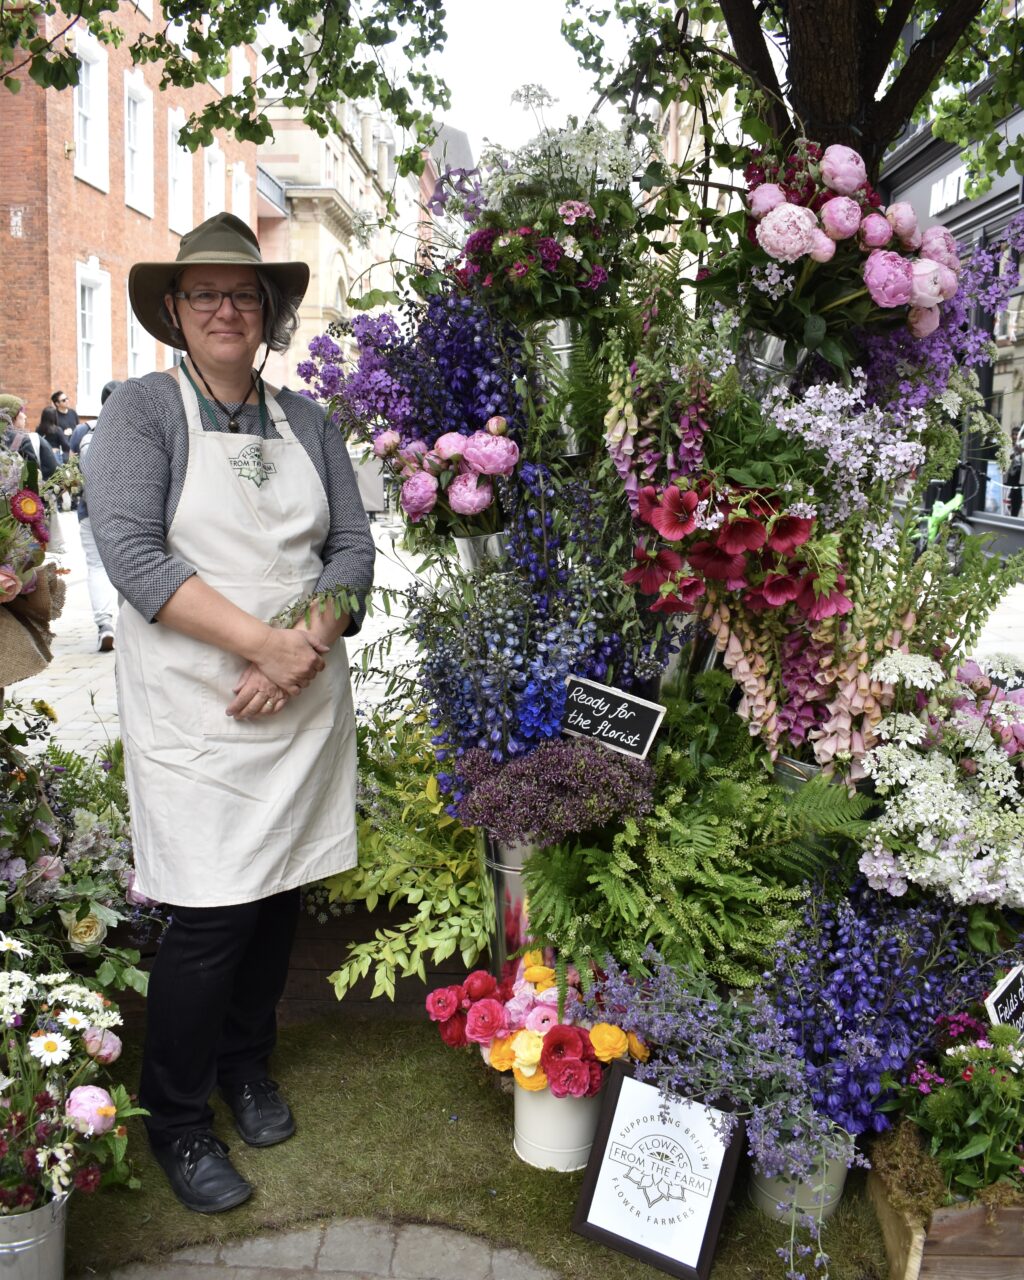 The floriferous display made by Flowers from the Farm for the 2022 Manchester Flower Show